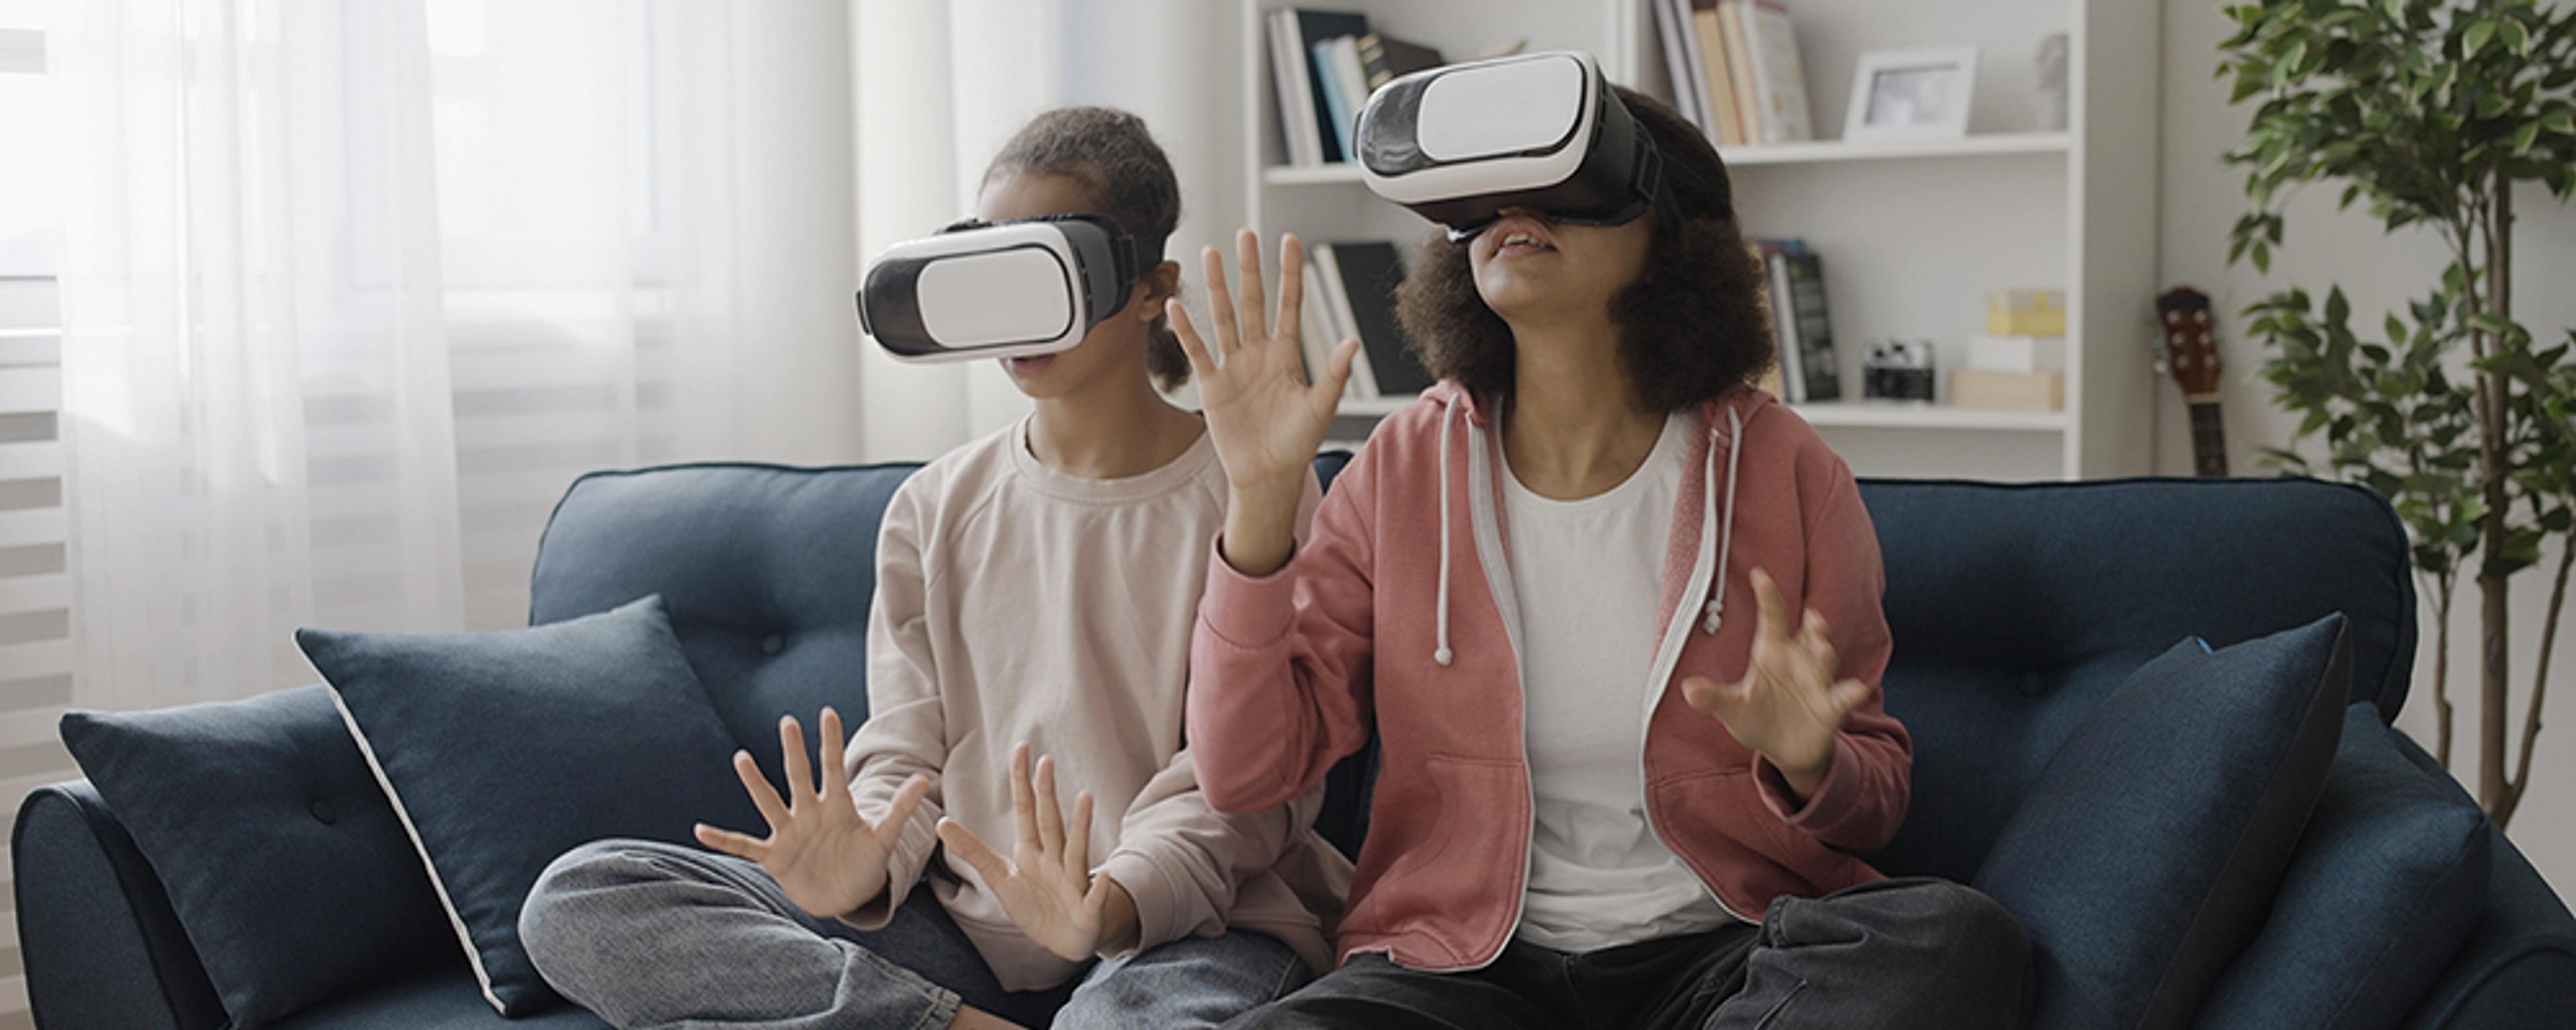 User Safety in AR/VR: Protecting Teens